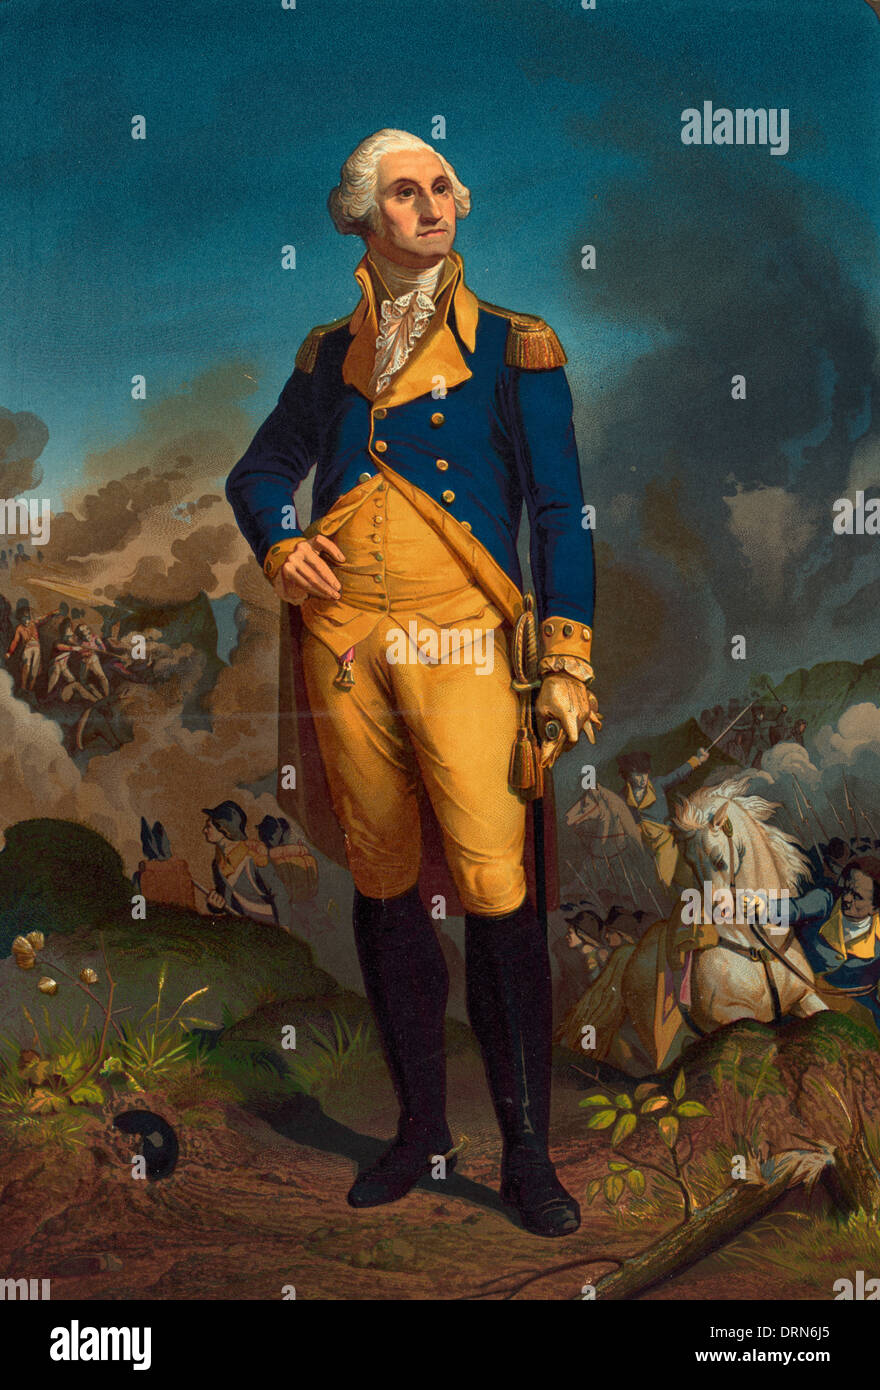 General George Washington with battle scenes in background Stock Photo